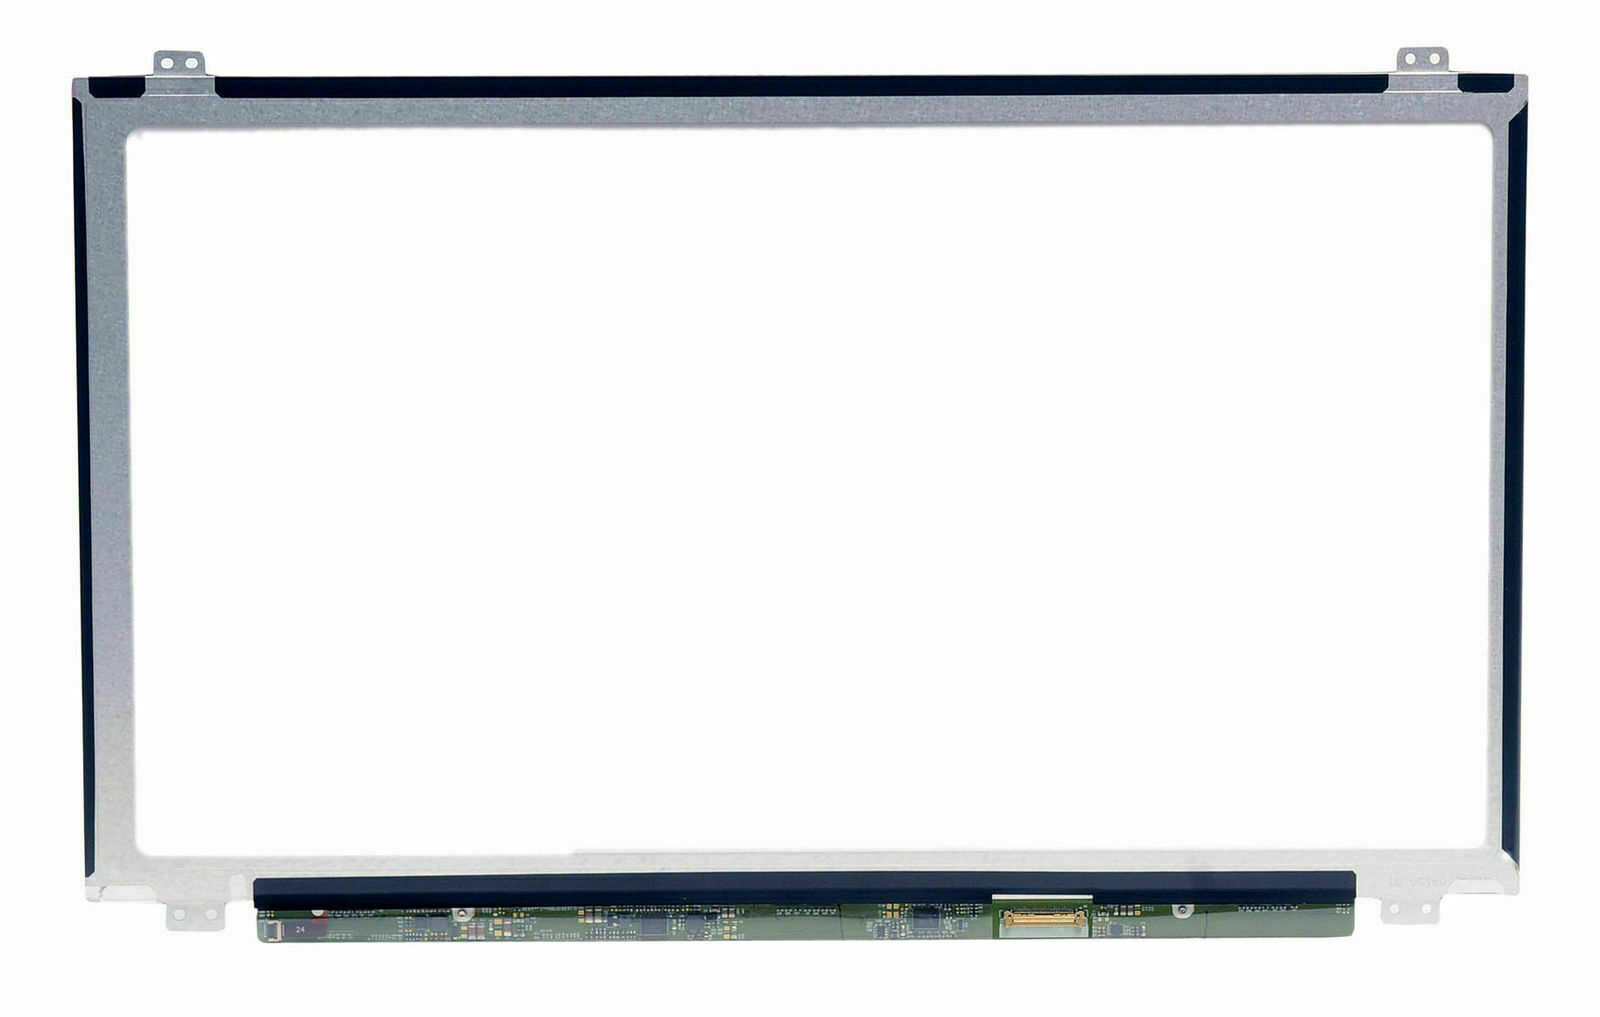 Primary image for Brand New ASUS S510UA-DS51 15.6" FHD LCD SCREEN 18010-15613900 B156HAN02.1